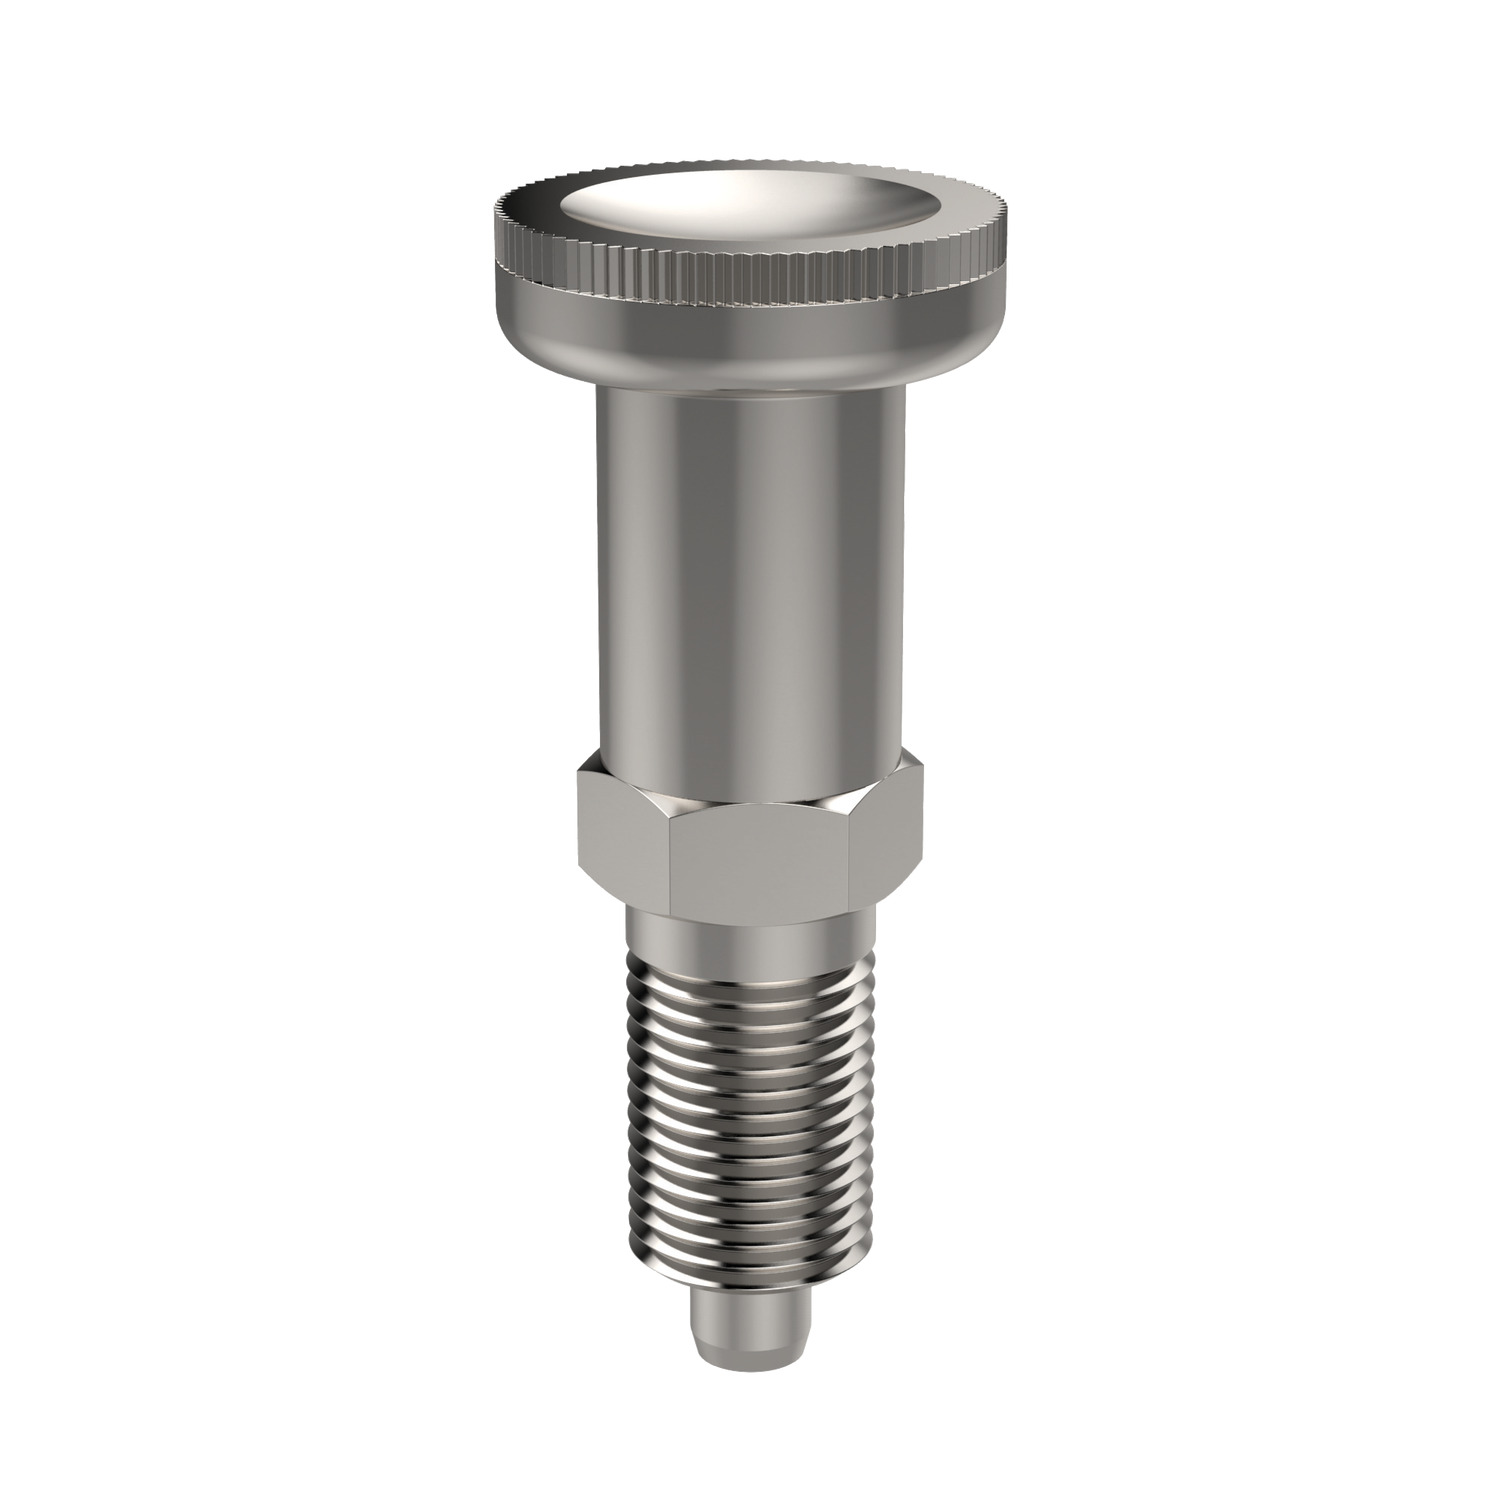 Index Plungers - Pull Grip Fully stainless steel no-locking index plunger. This makes it suitable for the demands of food processing, pharmaceutical or water treatment applications.